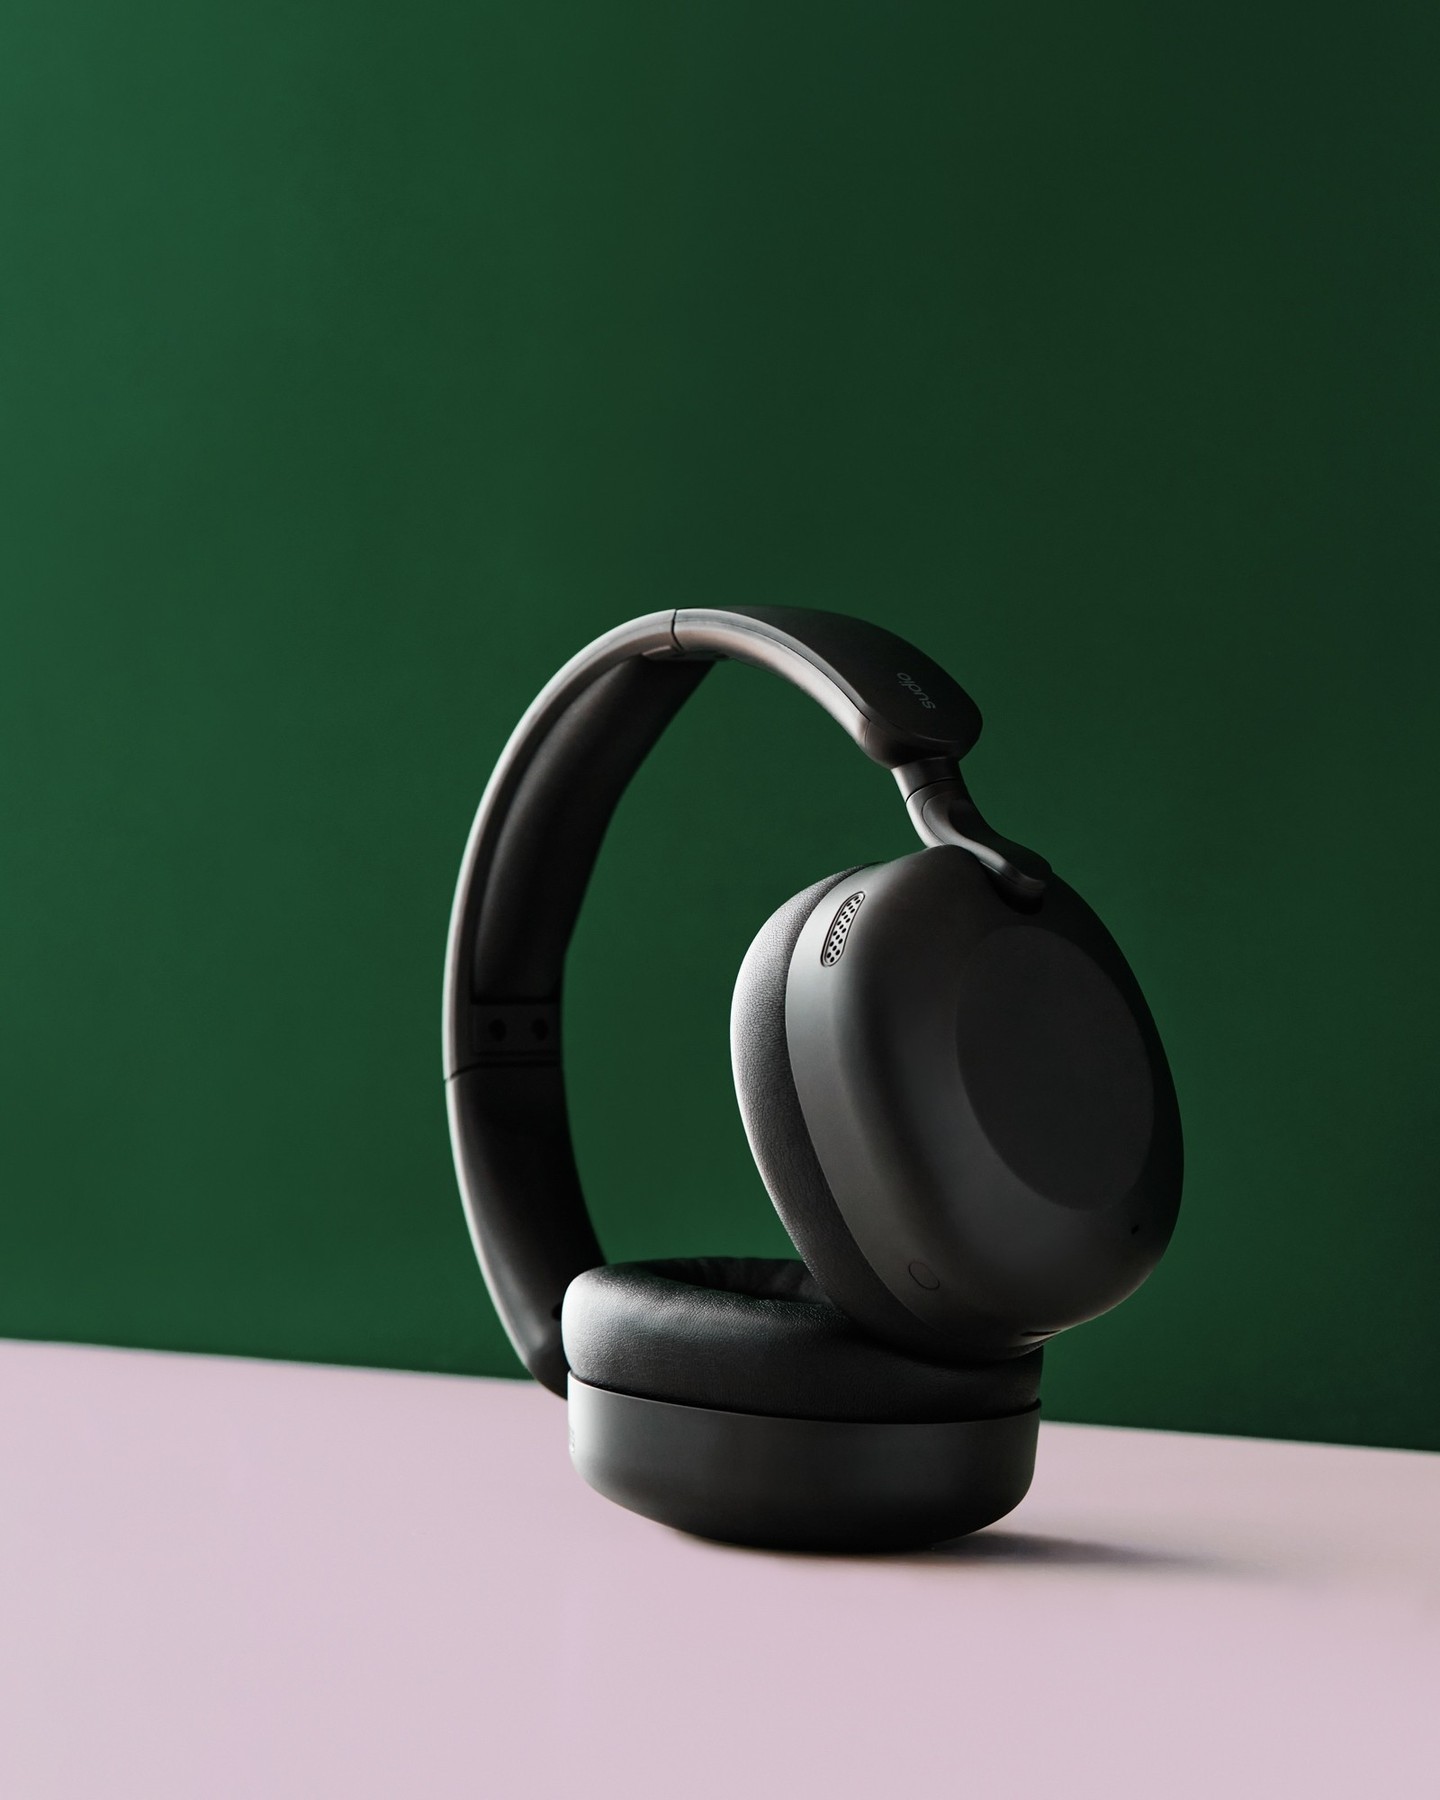 The new Sudio K2 headphones. A work of art for your eyes and ears.⁠
⁠
#sudio #shapingsound #artislife #K2Black